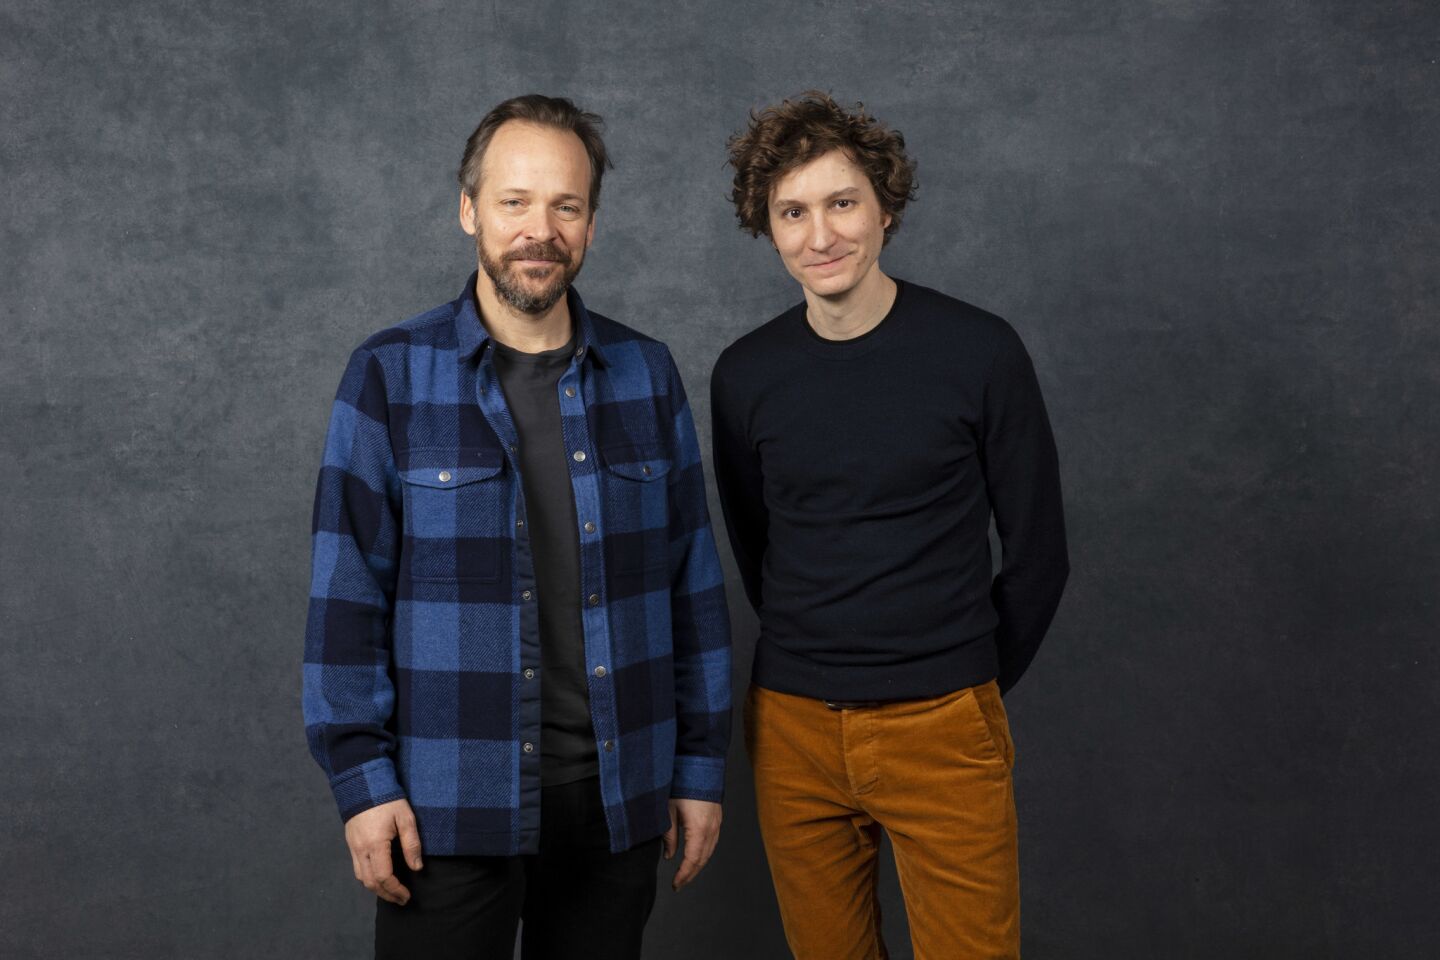 Actor Peter Sarsgaard, left, and director Michael Tyburski, from the film "The Sound of Silence," photographed at the 2019 Sundance Film Festival in Park City, Utah, on Friday, Jan. 25.